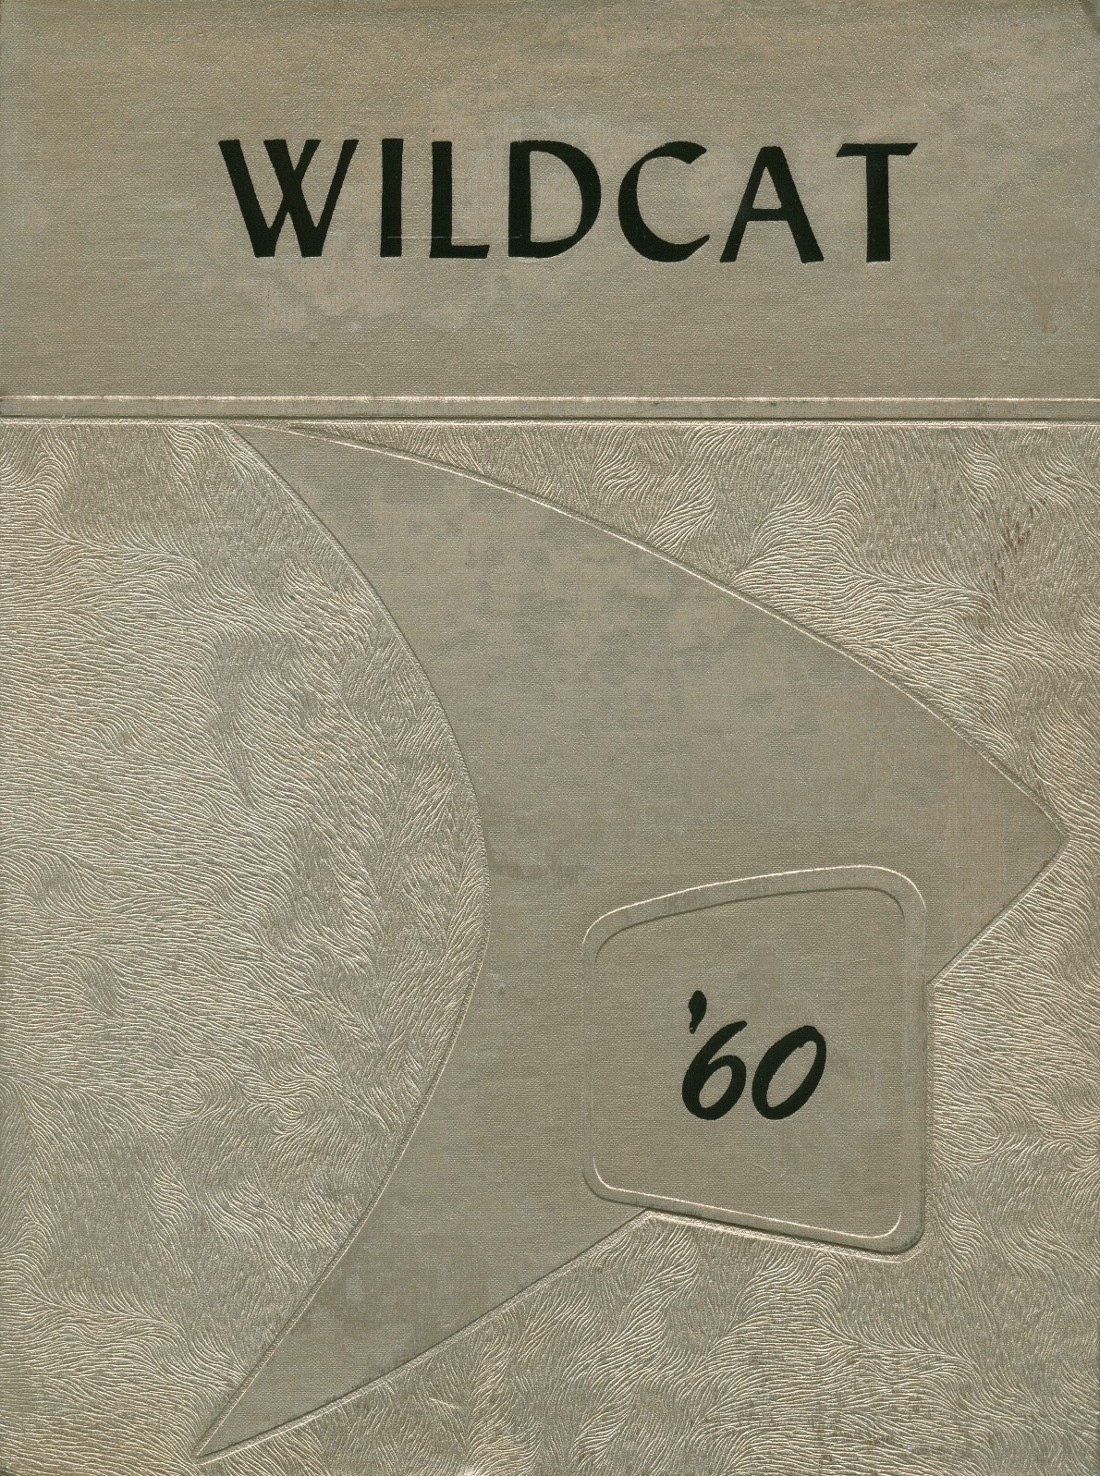 1960 yearbook from Archer City High School from Archer city, Texas